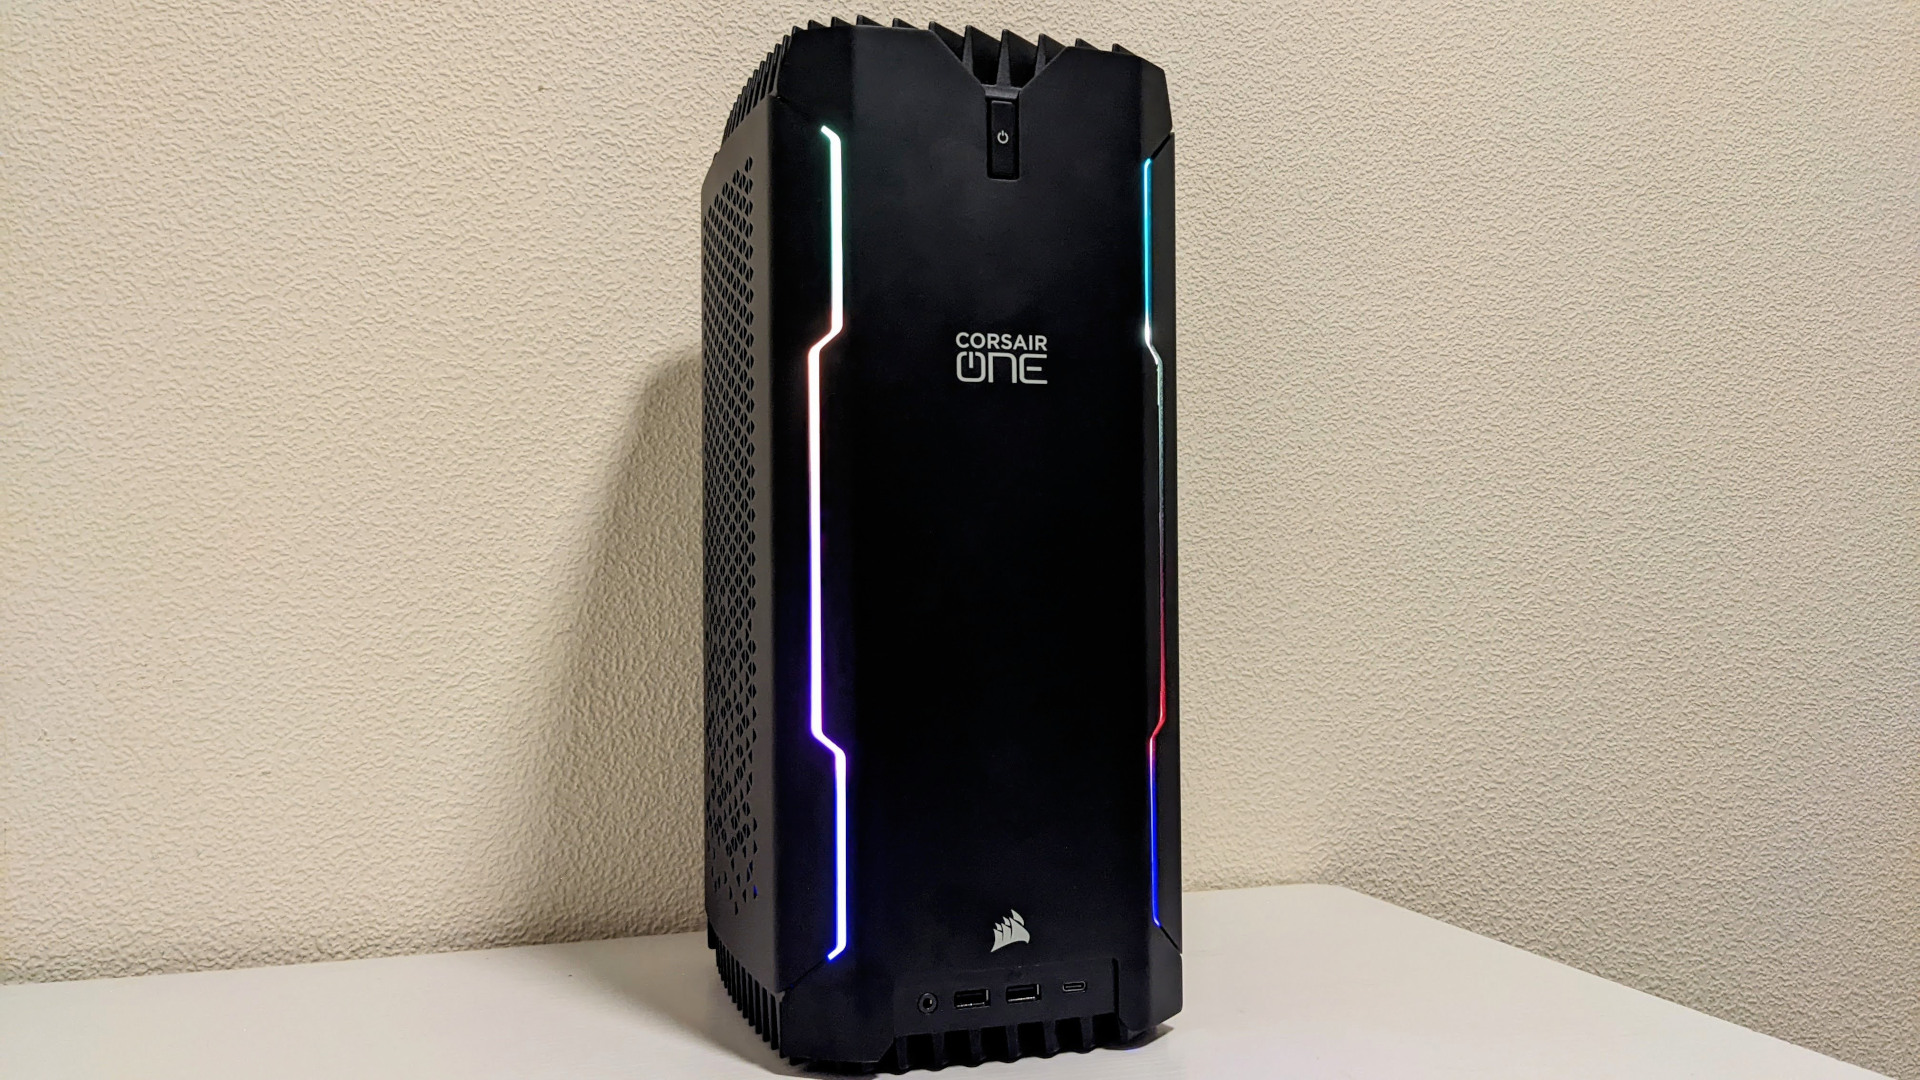 Corsair One i300 review – a unique but expensive gaming PC